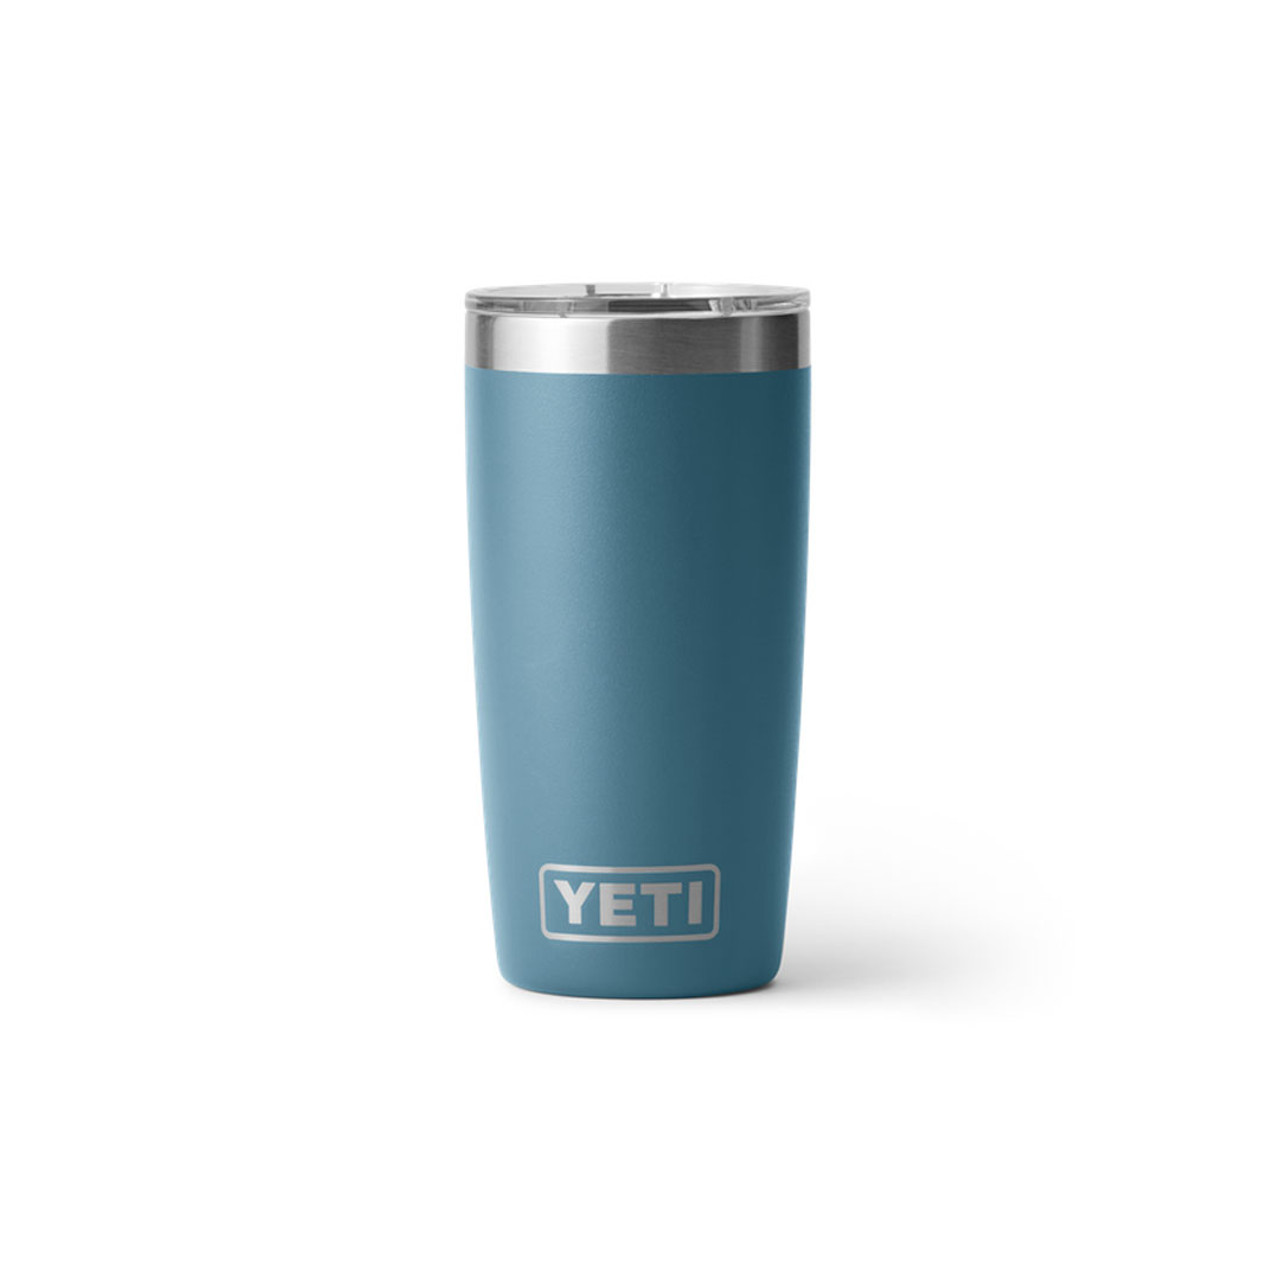 https://cdn11.bigcommerce.com/s-ppsyskcavg/images/stencil/1280x1280/products/59461/197142/W-site_studio_Drinkware_Rambler_10oz_Tumbler_NordicBlue_Front_Primary_B_2400x2400__55551.1657564564.jpg?c=2?imbypass=on